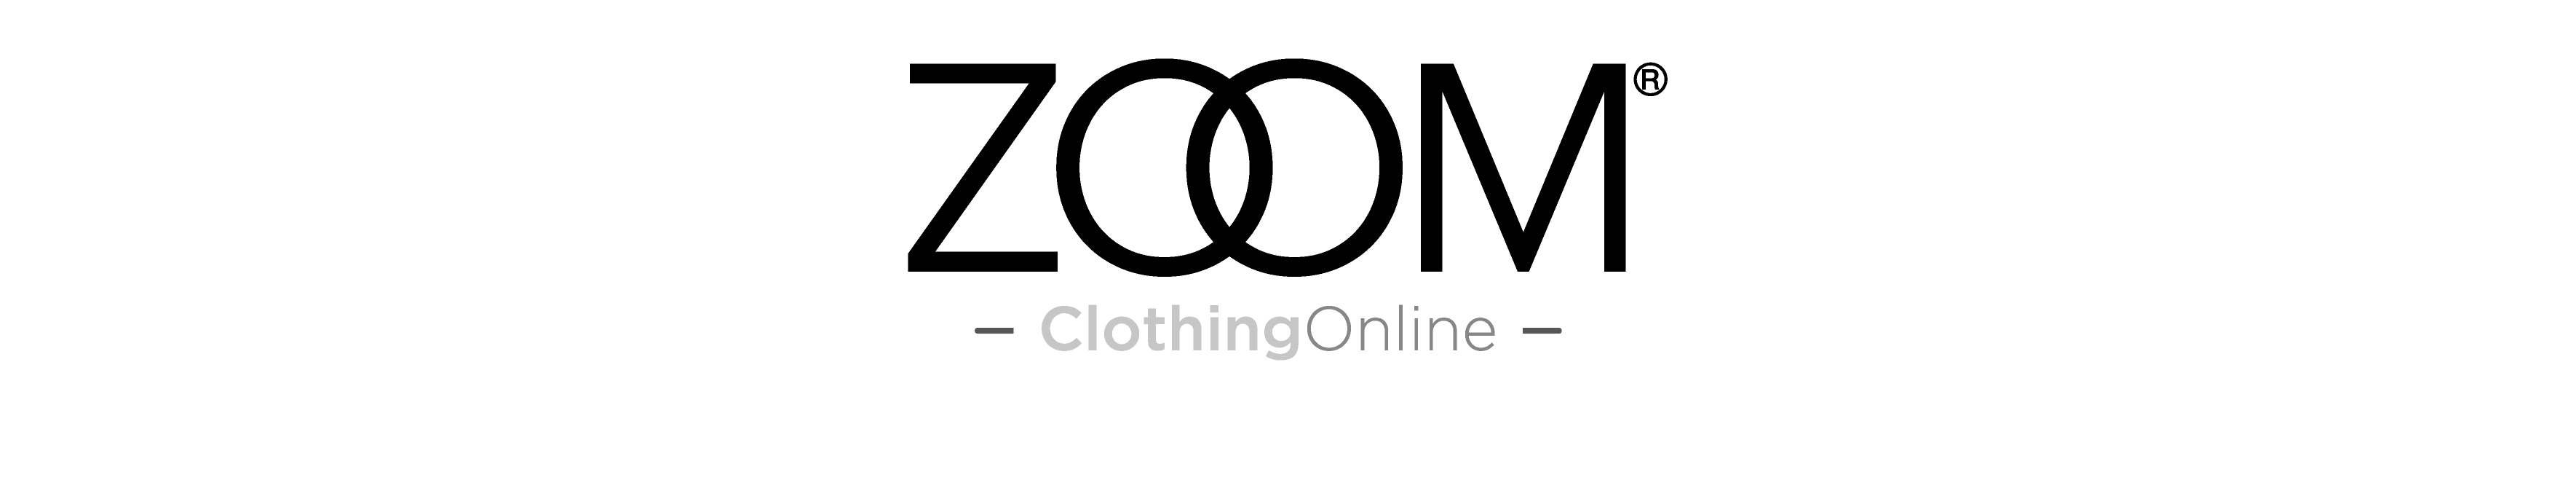 Zoom Logo - About - Zoom Clothing Company